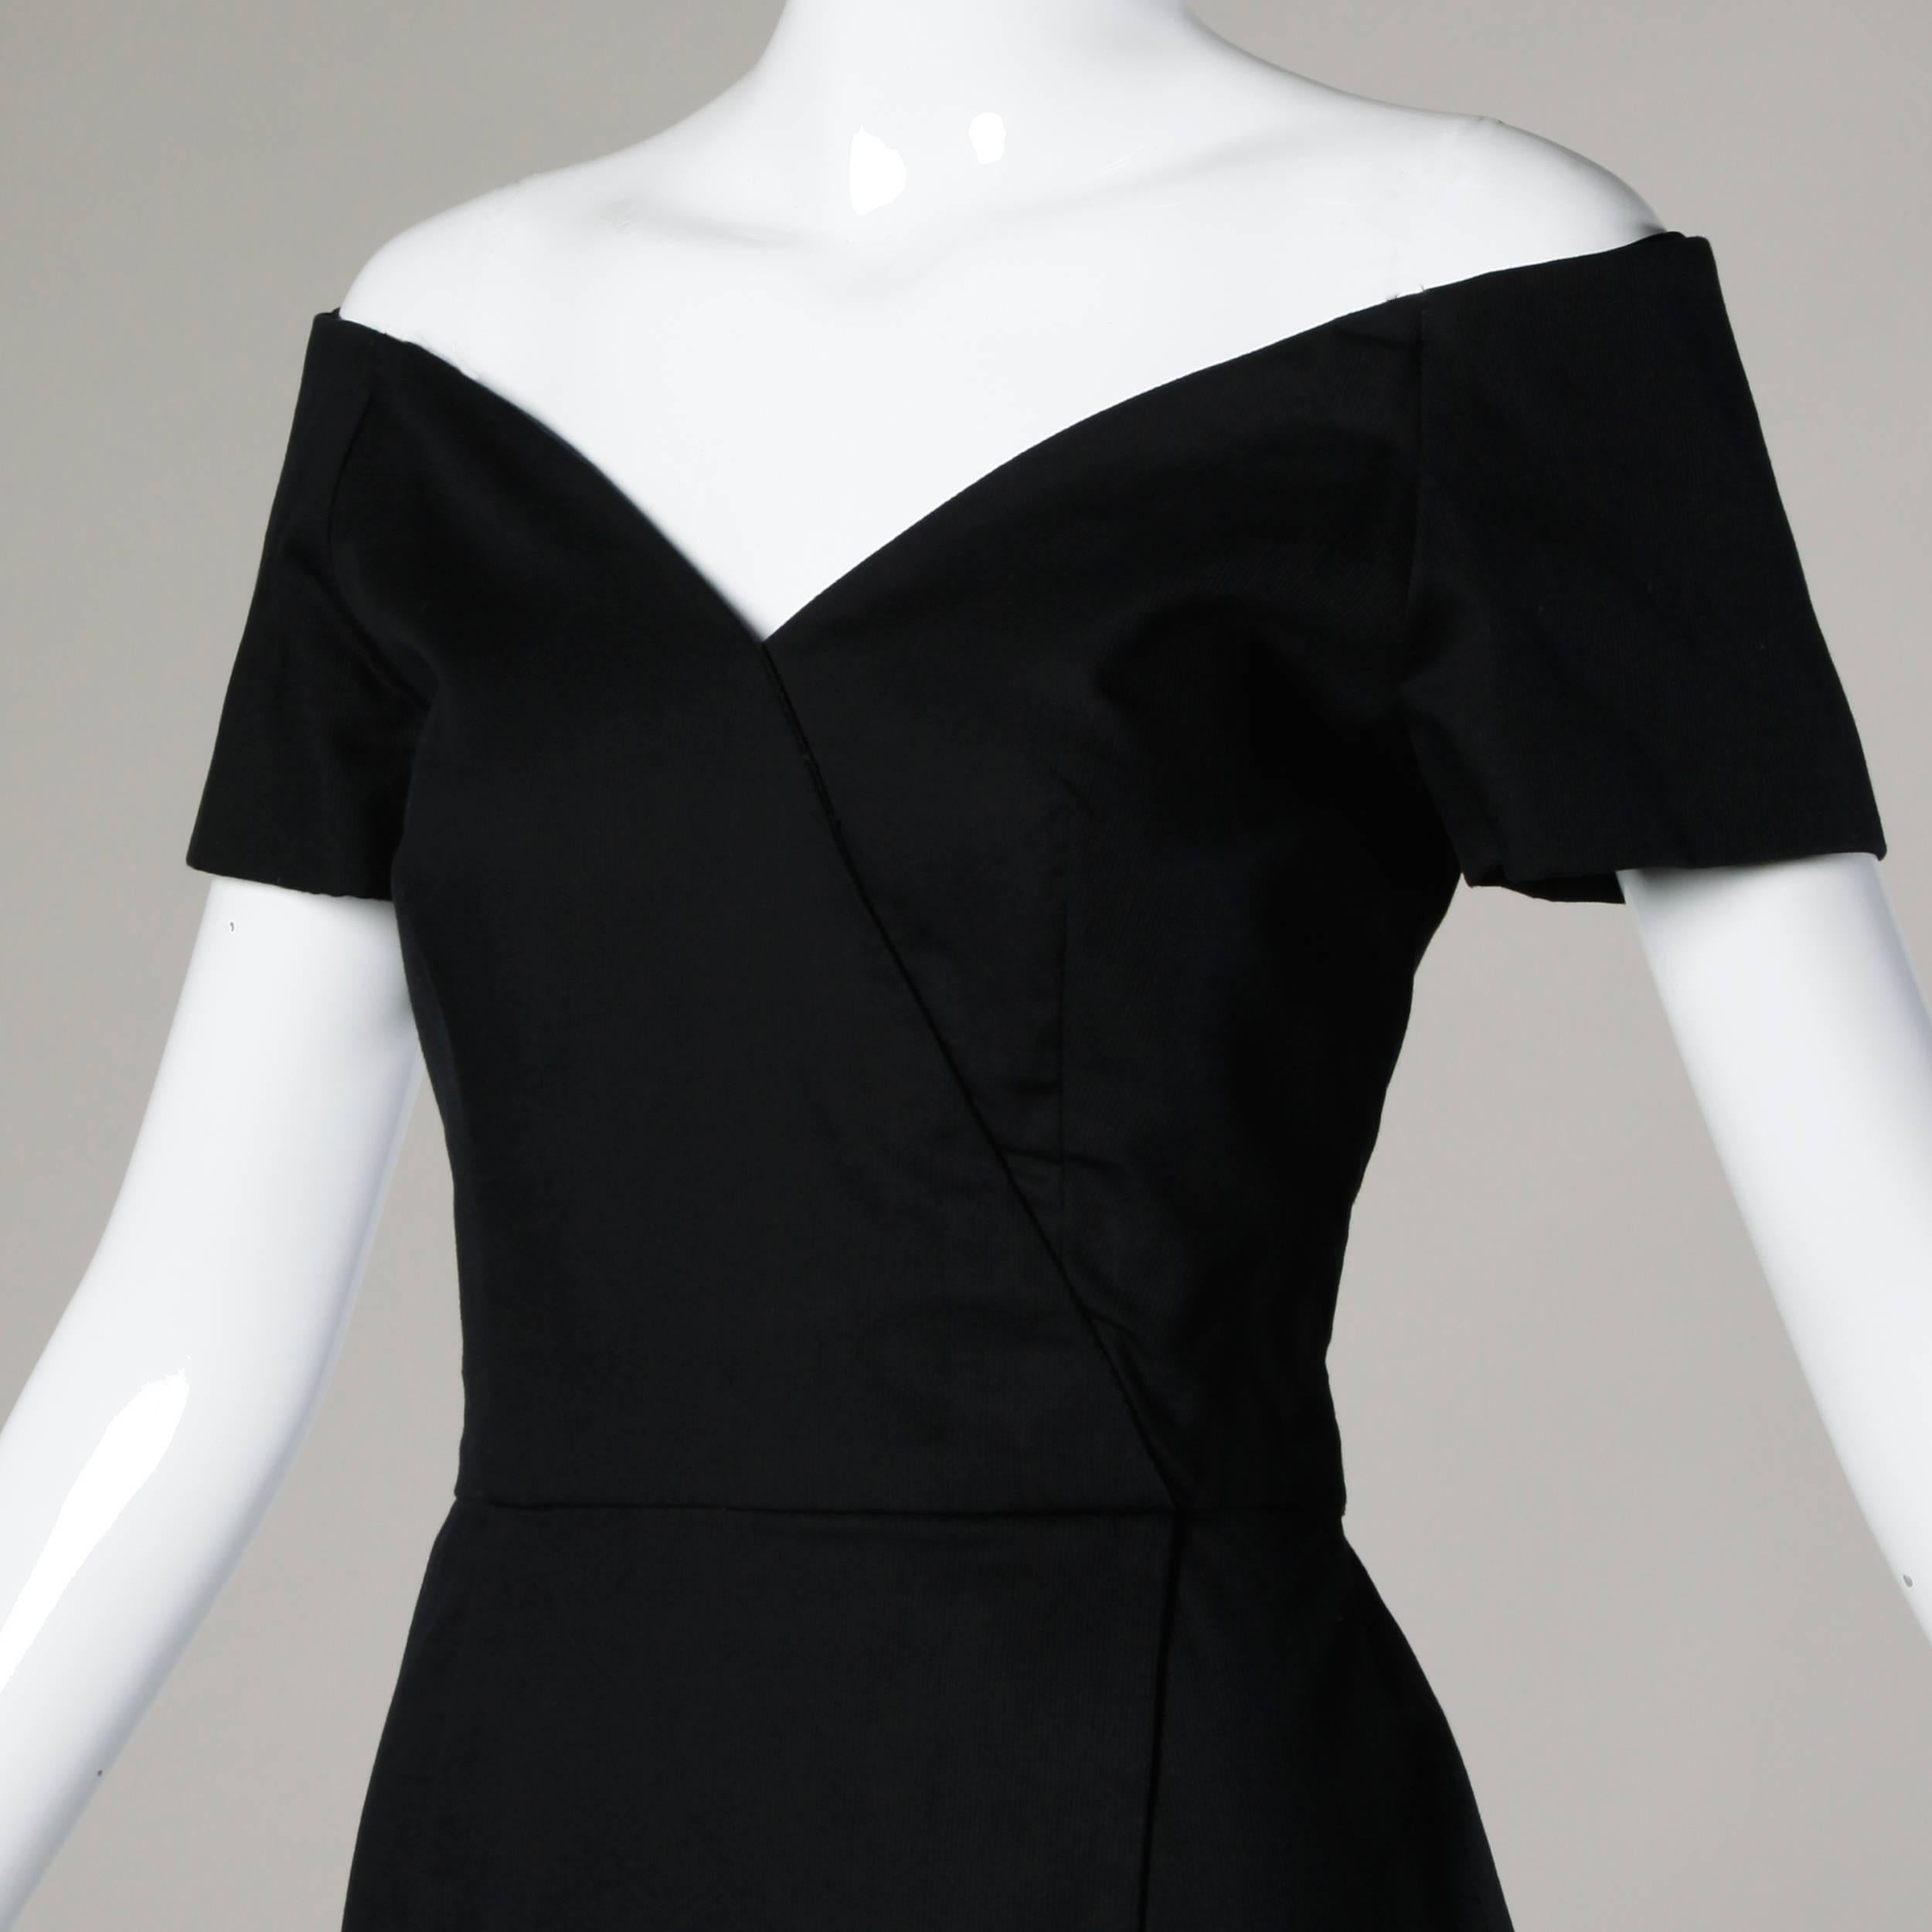 Vintage little black dress by Arnold Scaasi. Off-the-shoulder straps and hourglass silhouette.

Details:

Fully Lined
Back Zip and Hook Closure
Marked Size: Not Marked
Estimated Size: XS
Color: Black
Fabric: Not Marked
Label: Scaasi Nights